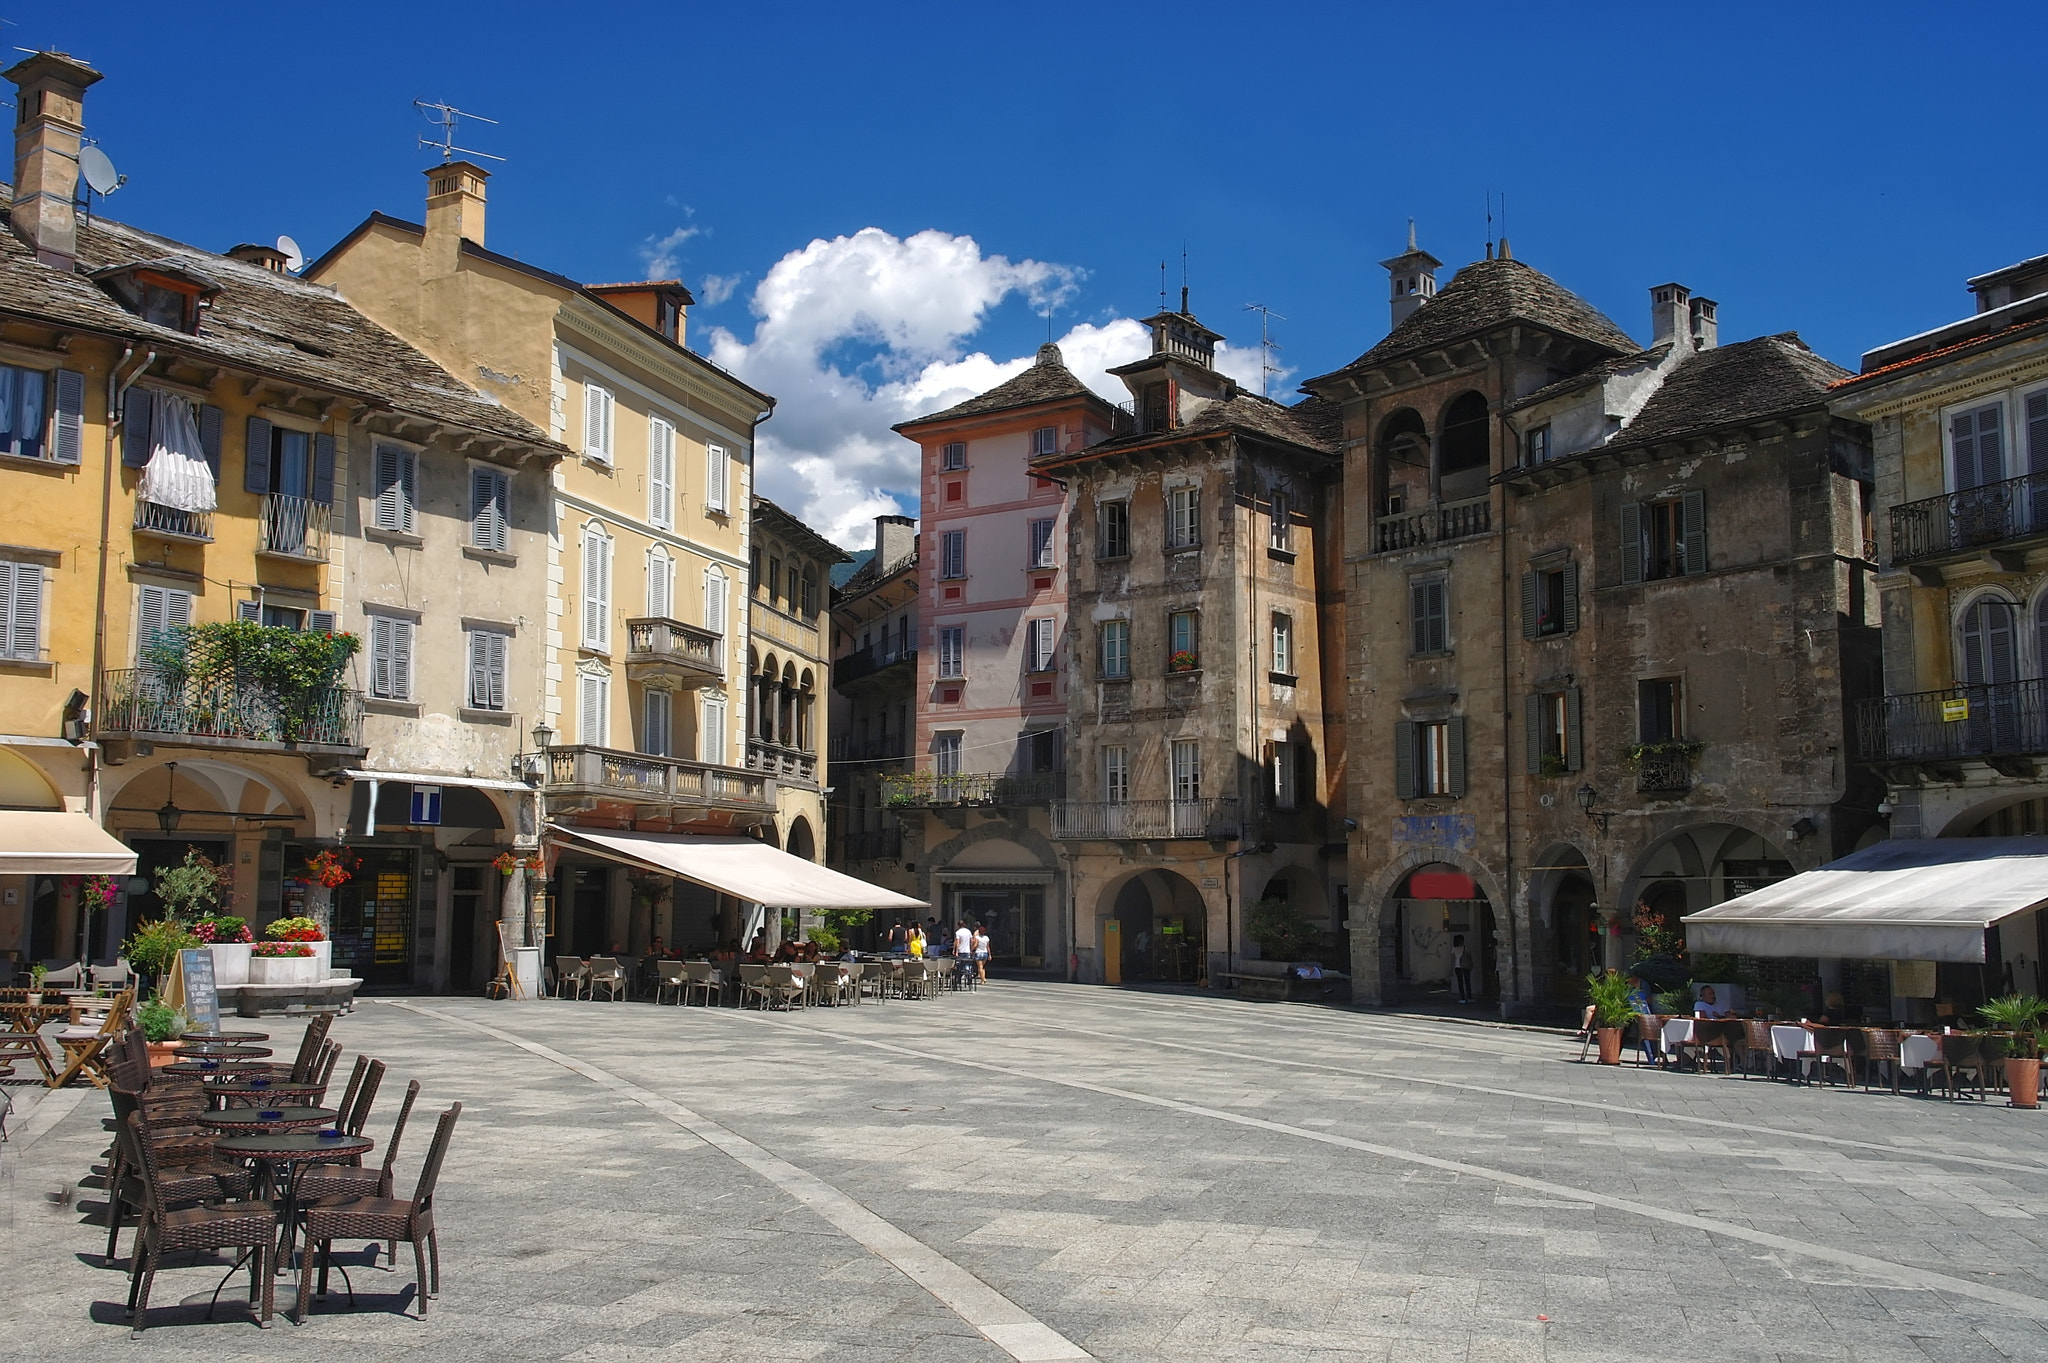 Samsung NX100 sample photo. Central square of domodossola photography